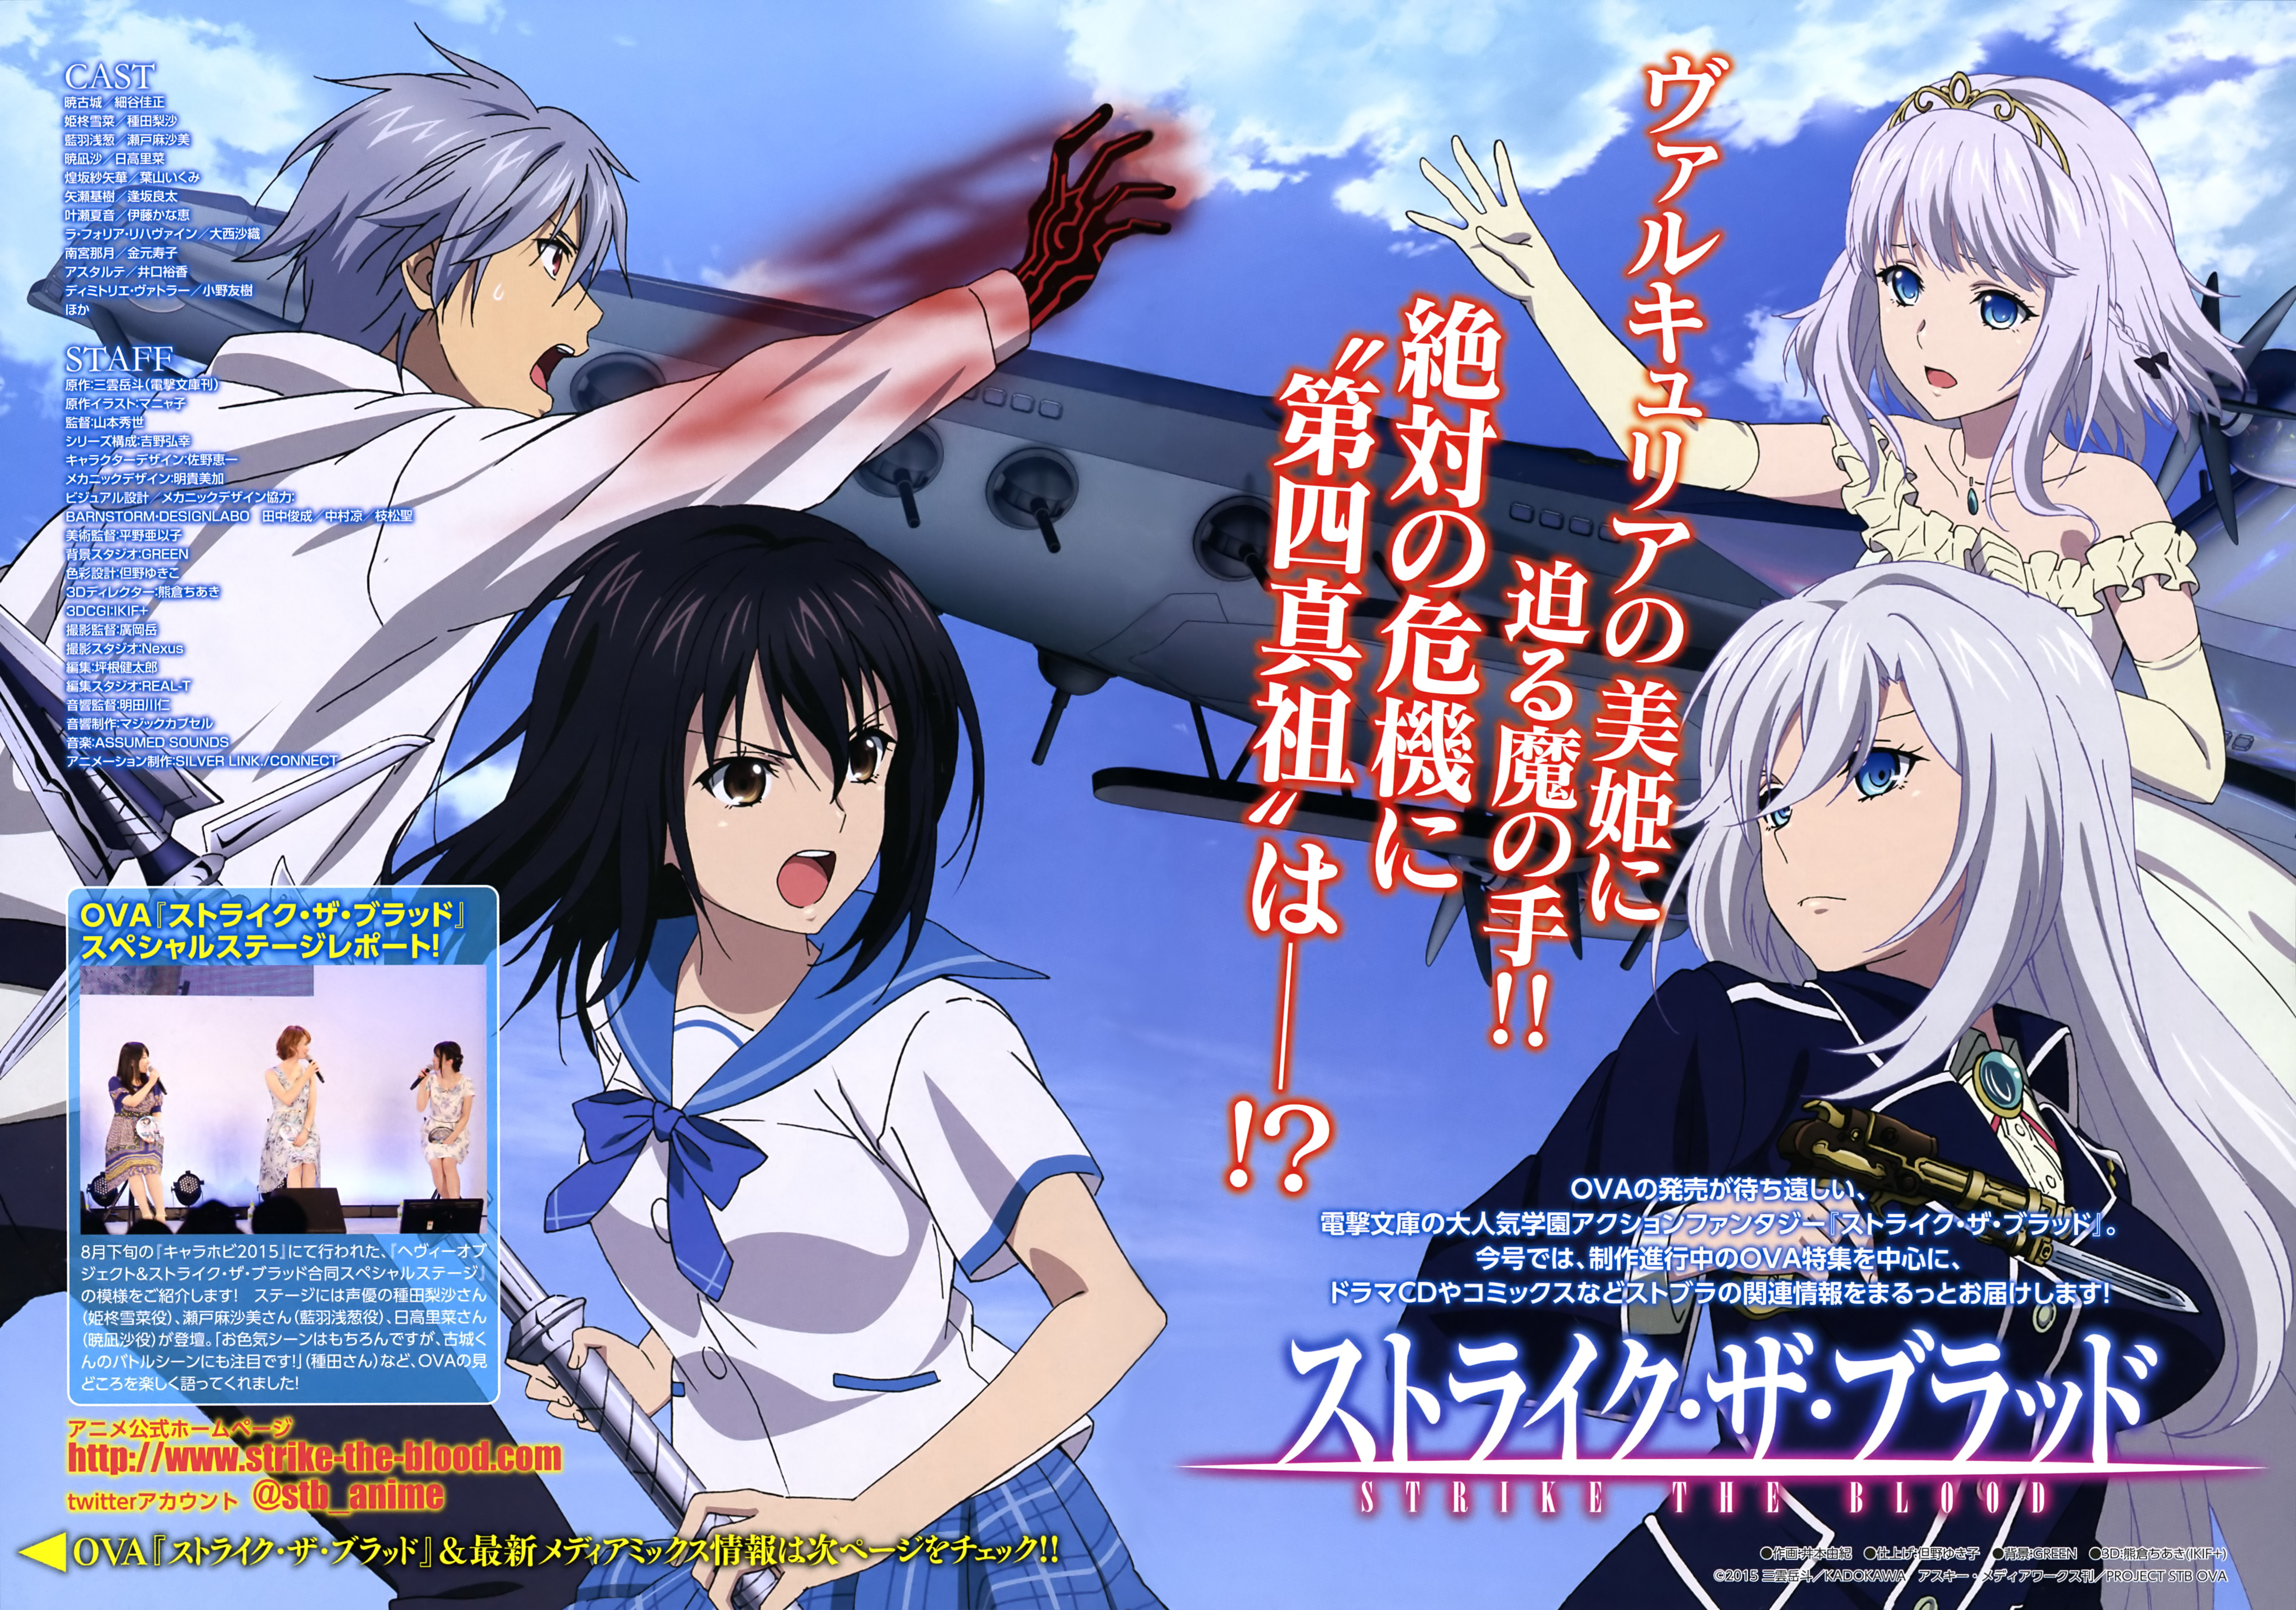 Strike The Blood Wallpapers Anime Hq Strike The Blood Pictures Images, Photos, Reviews